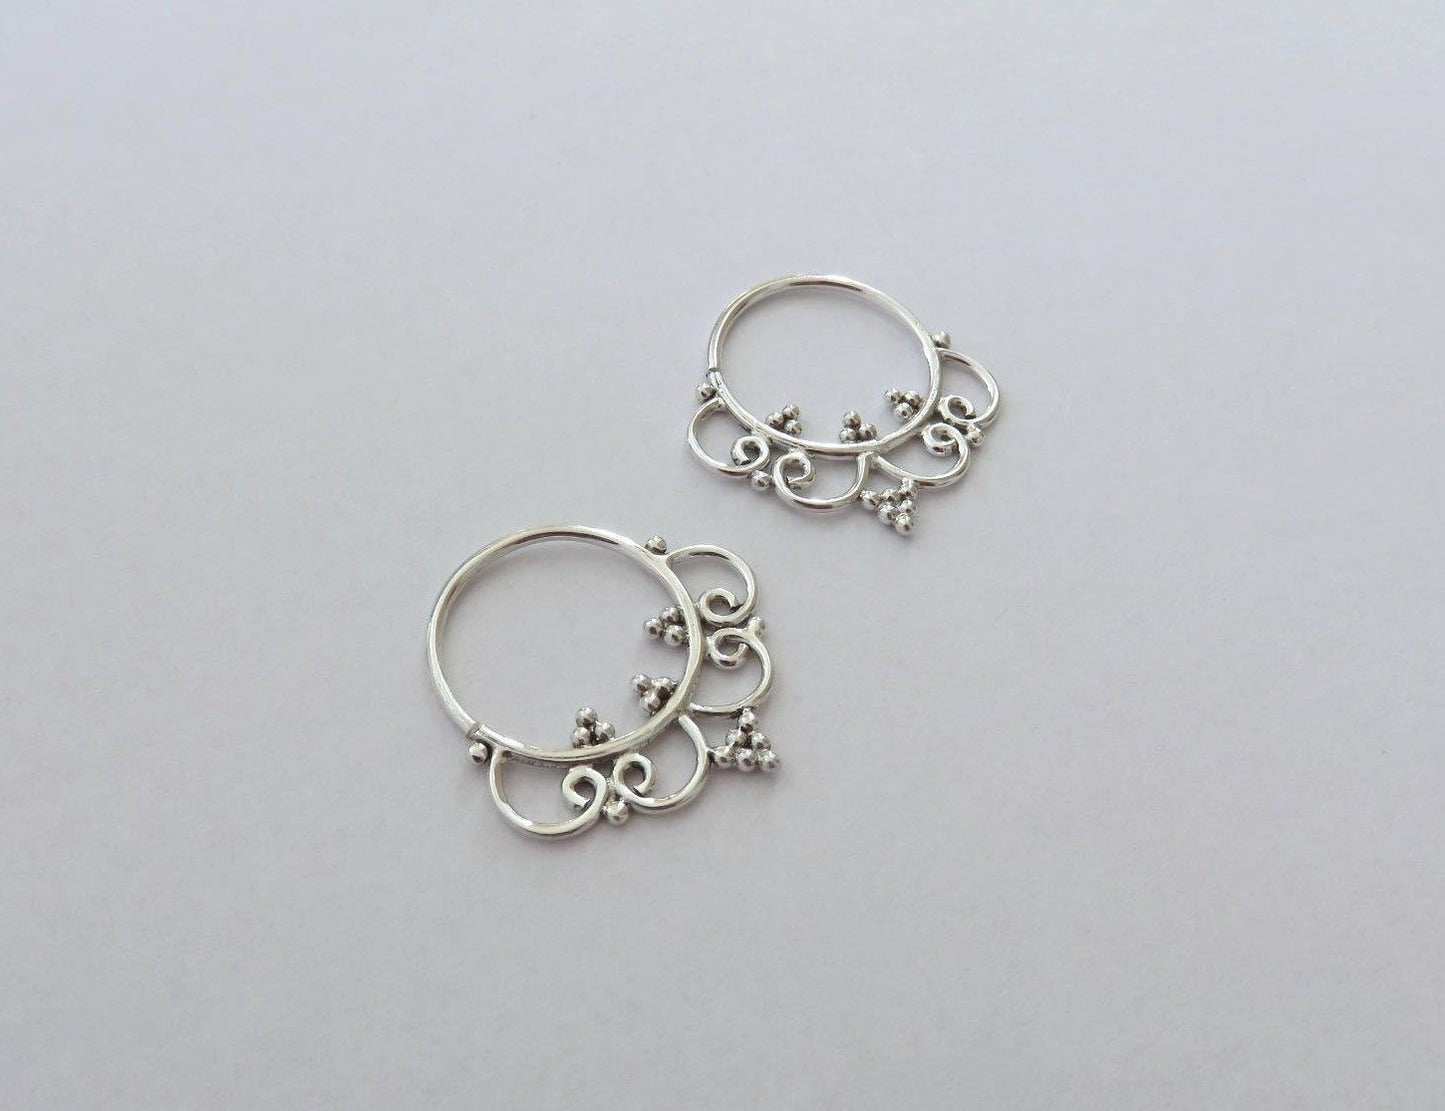 small hoop earrings decorated with dots and spirals made of silver